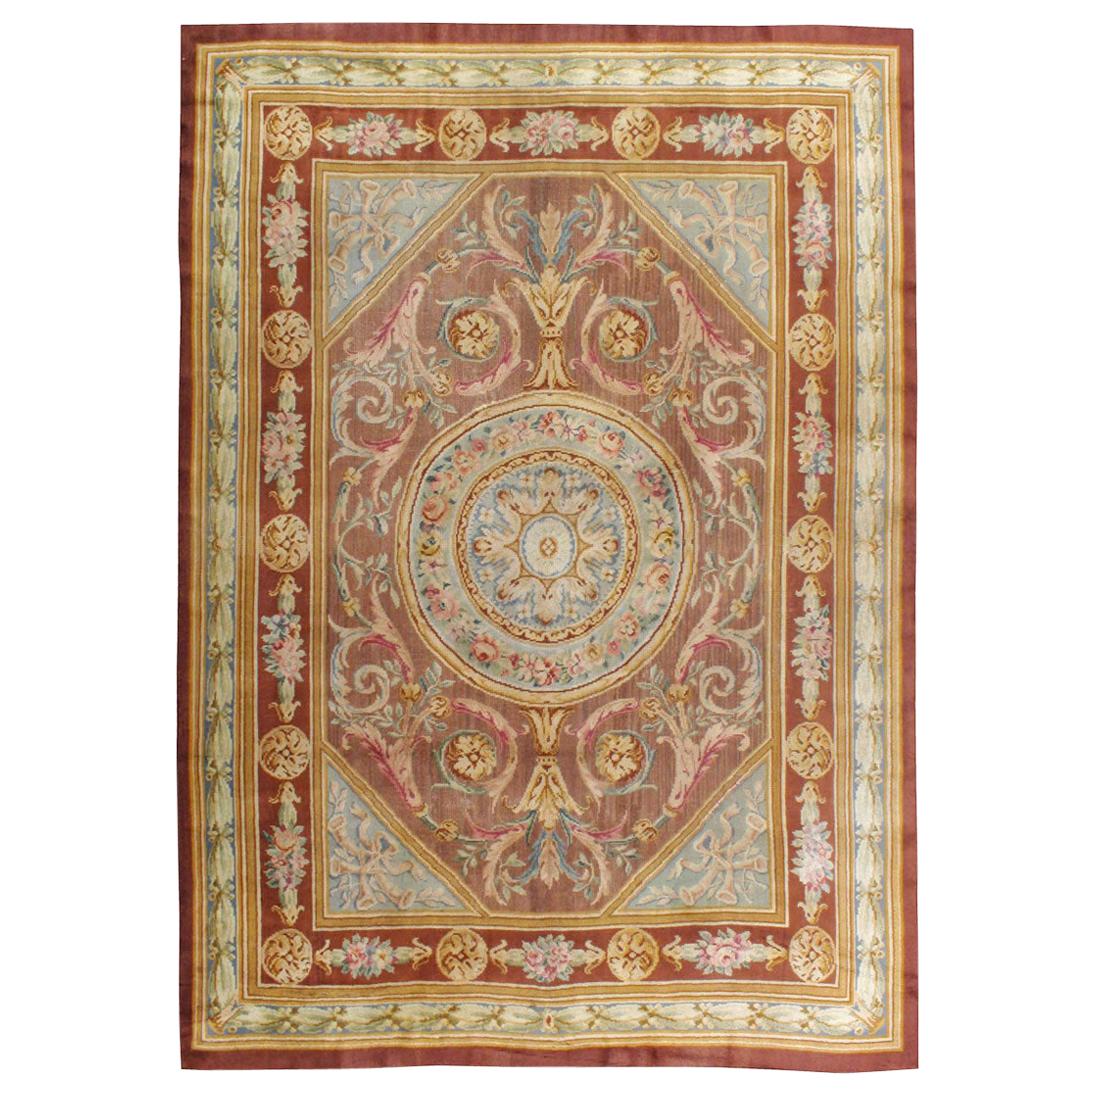 Antique French Savonnerie Rug in the Style of Louis XV